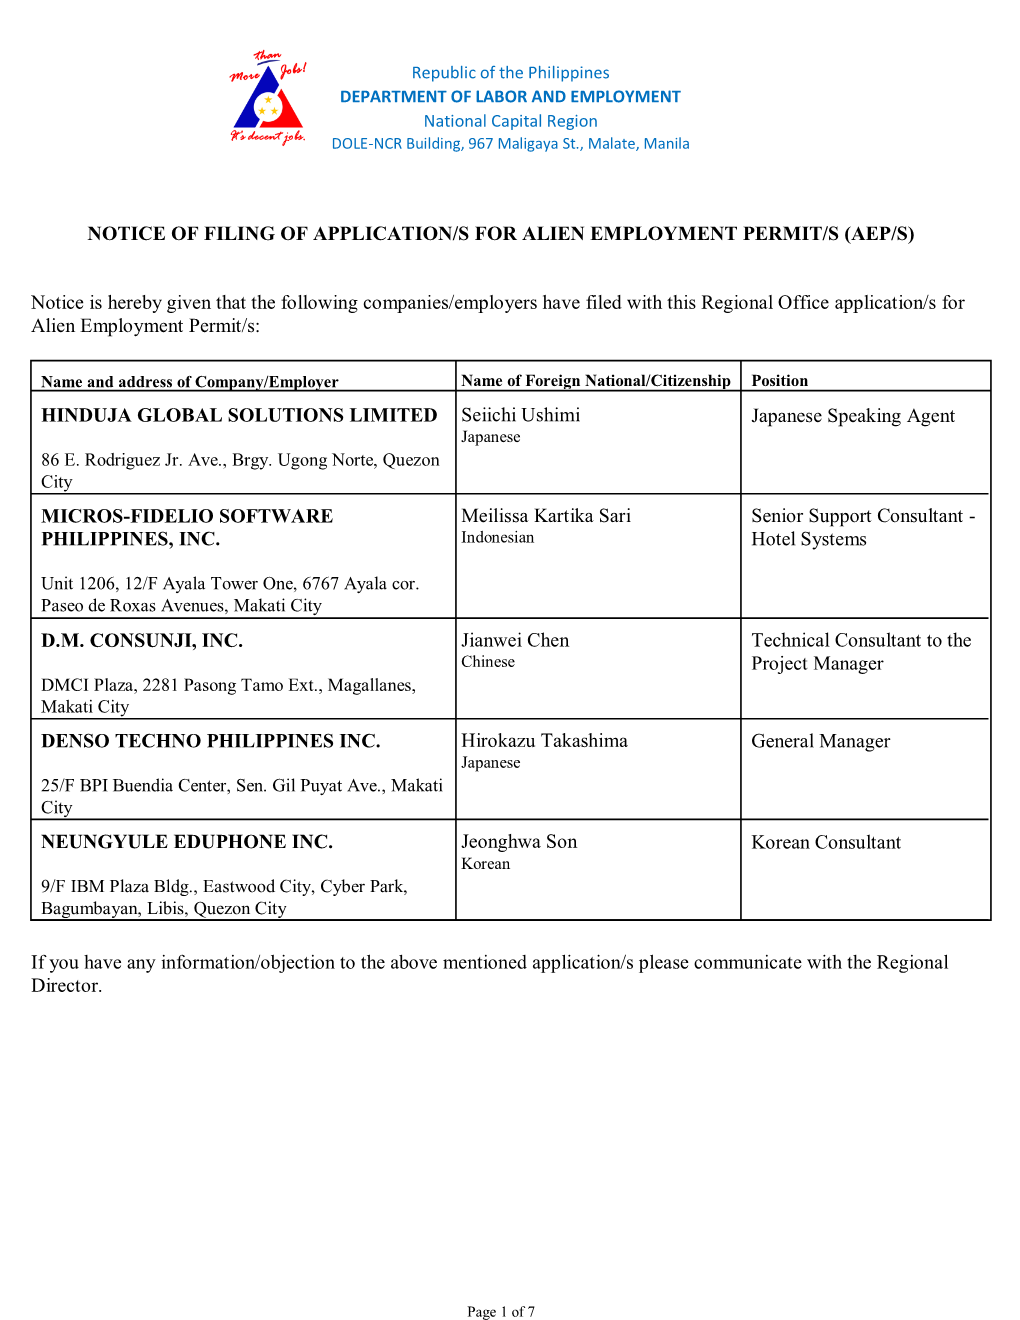 (AEP/S) Notice Is Hereby Given That the Following Companies/Empl